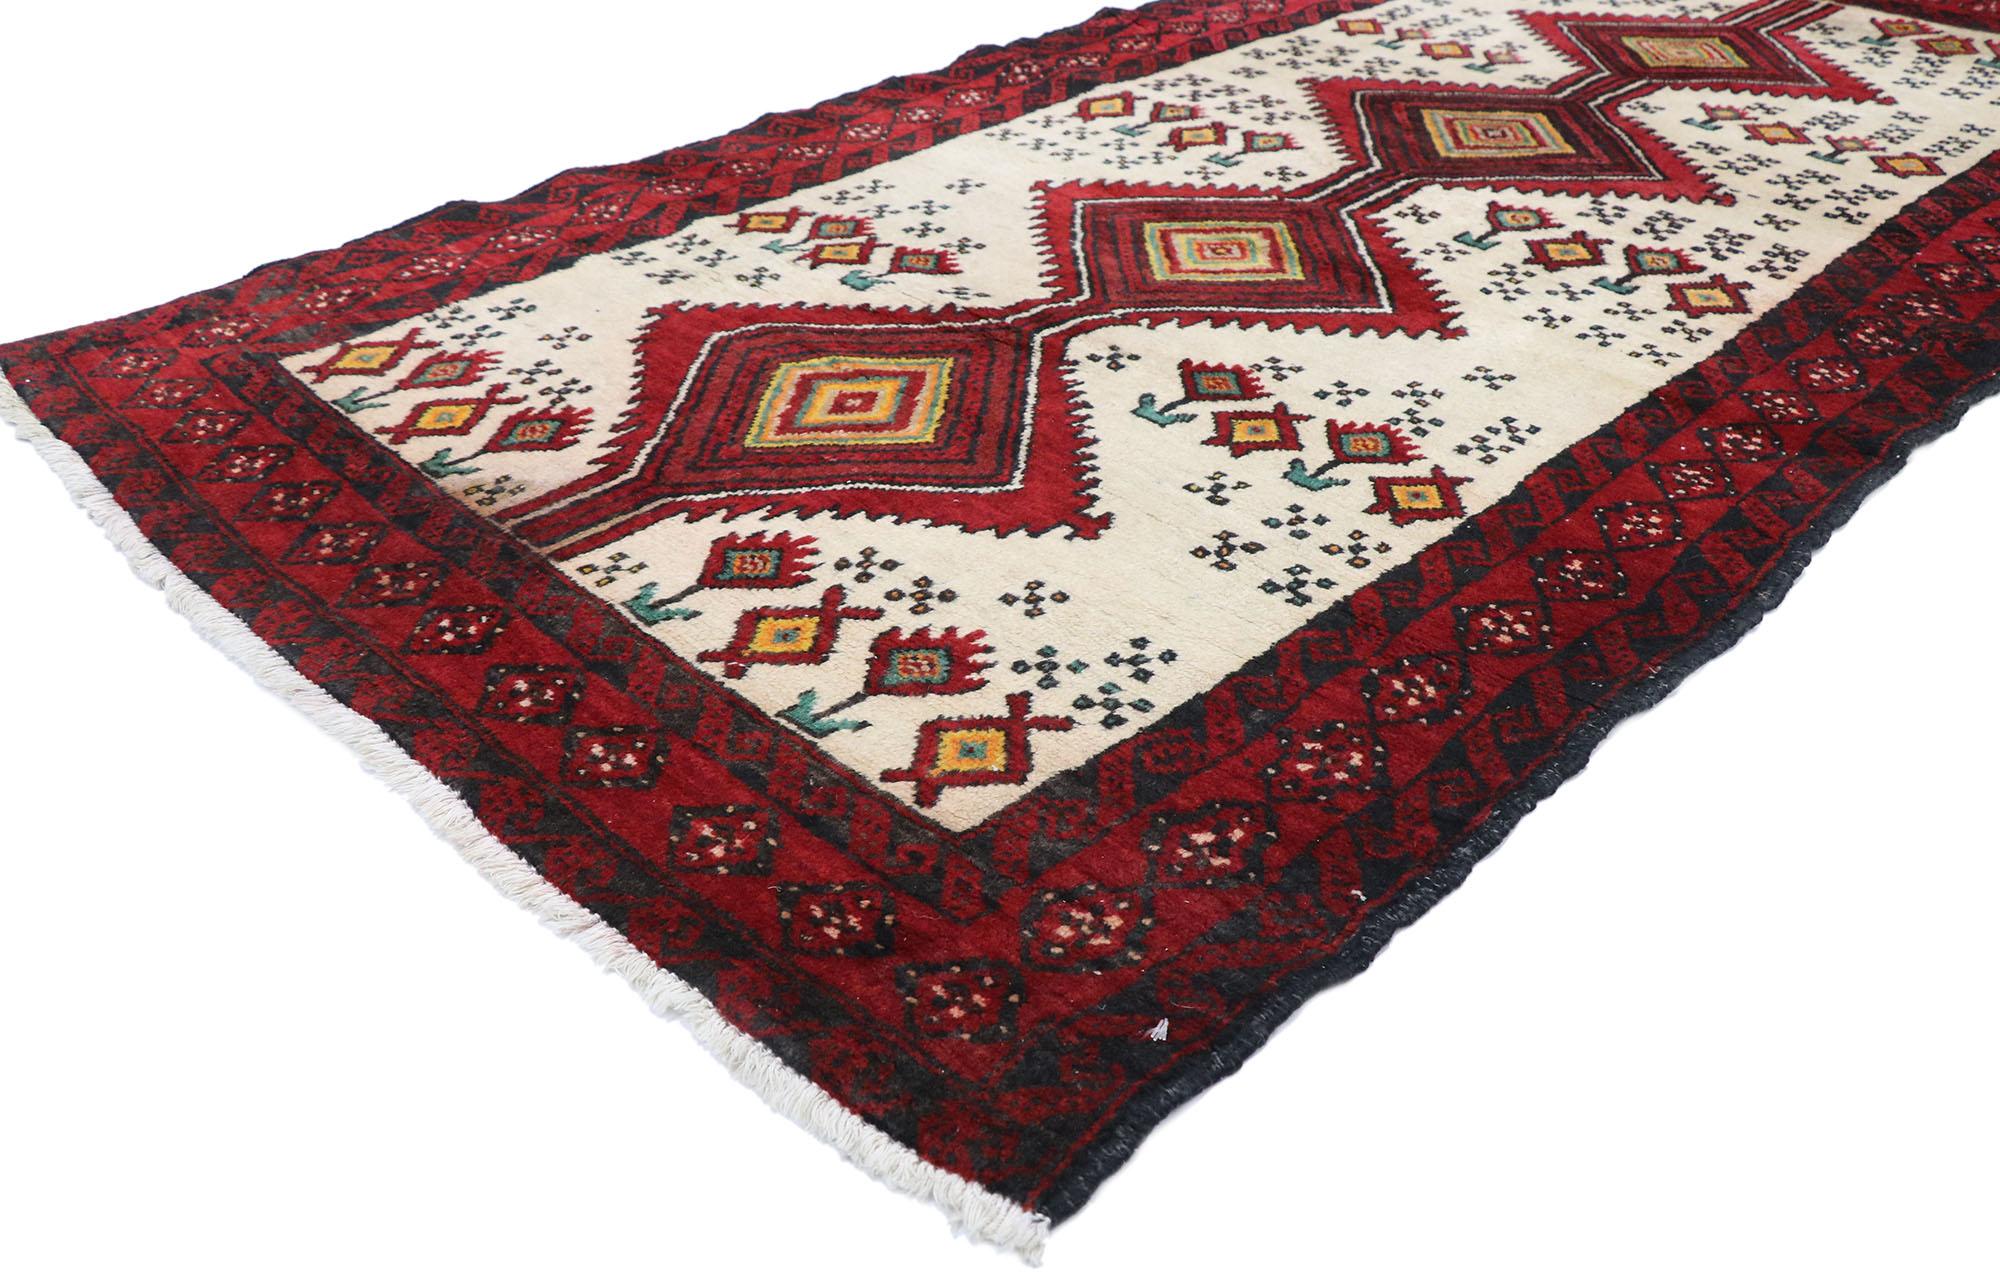 77712 Vintage Persian Baluch rug with Tribal Style 03'04 x 06'06. Warm and inviting with nomadic village charm, this hand-knotted wool vintage Persian Baluch rug is a captivating vision of woven beauty. A serrated pole medallion decorated with